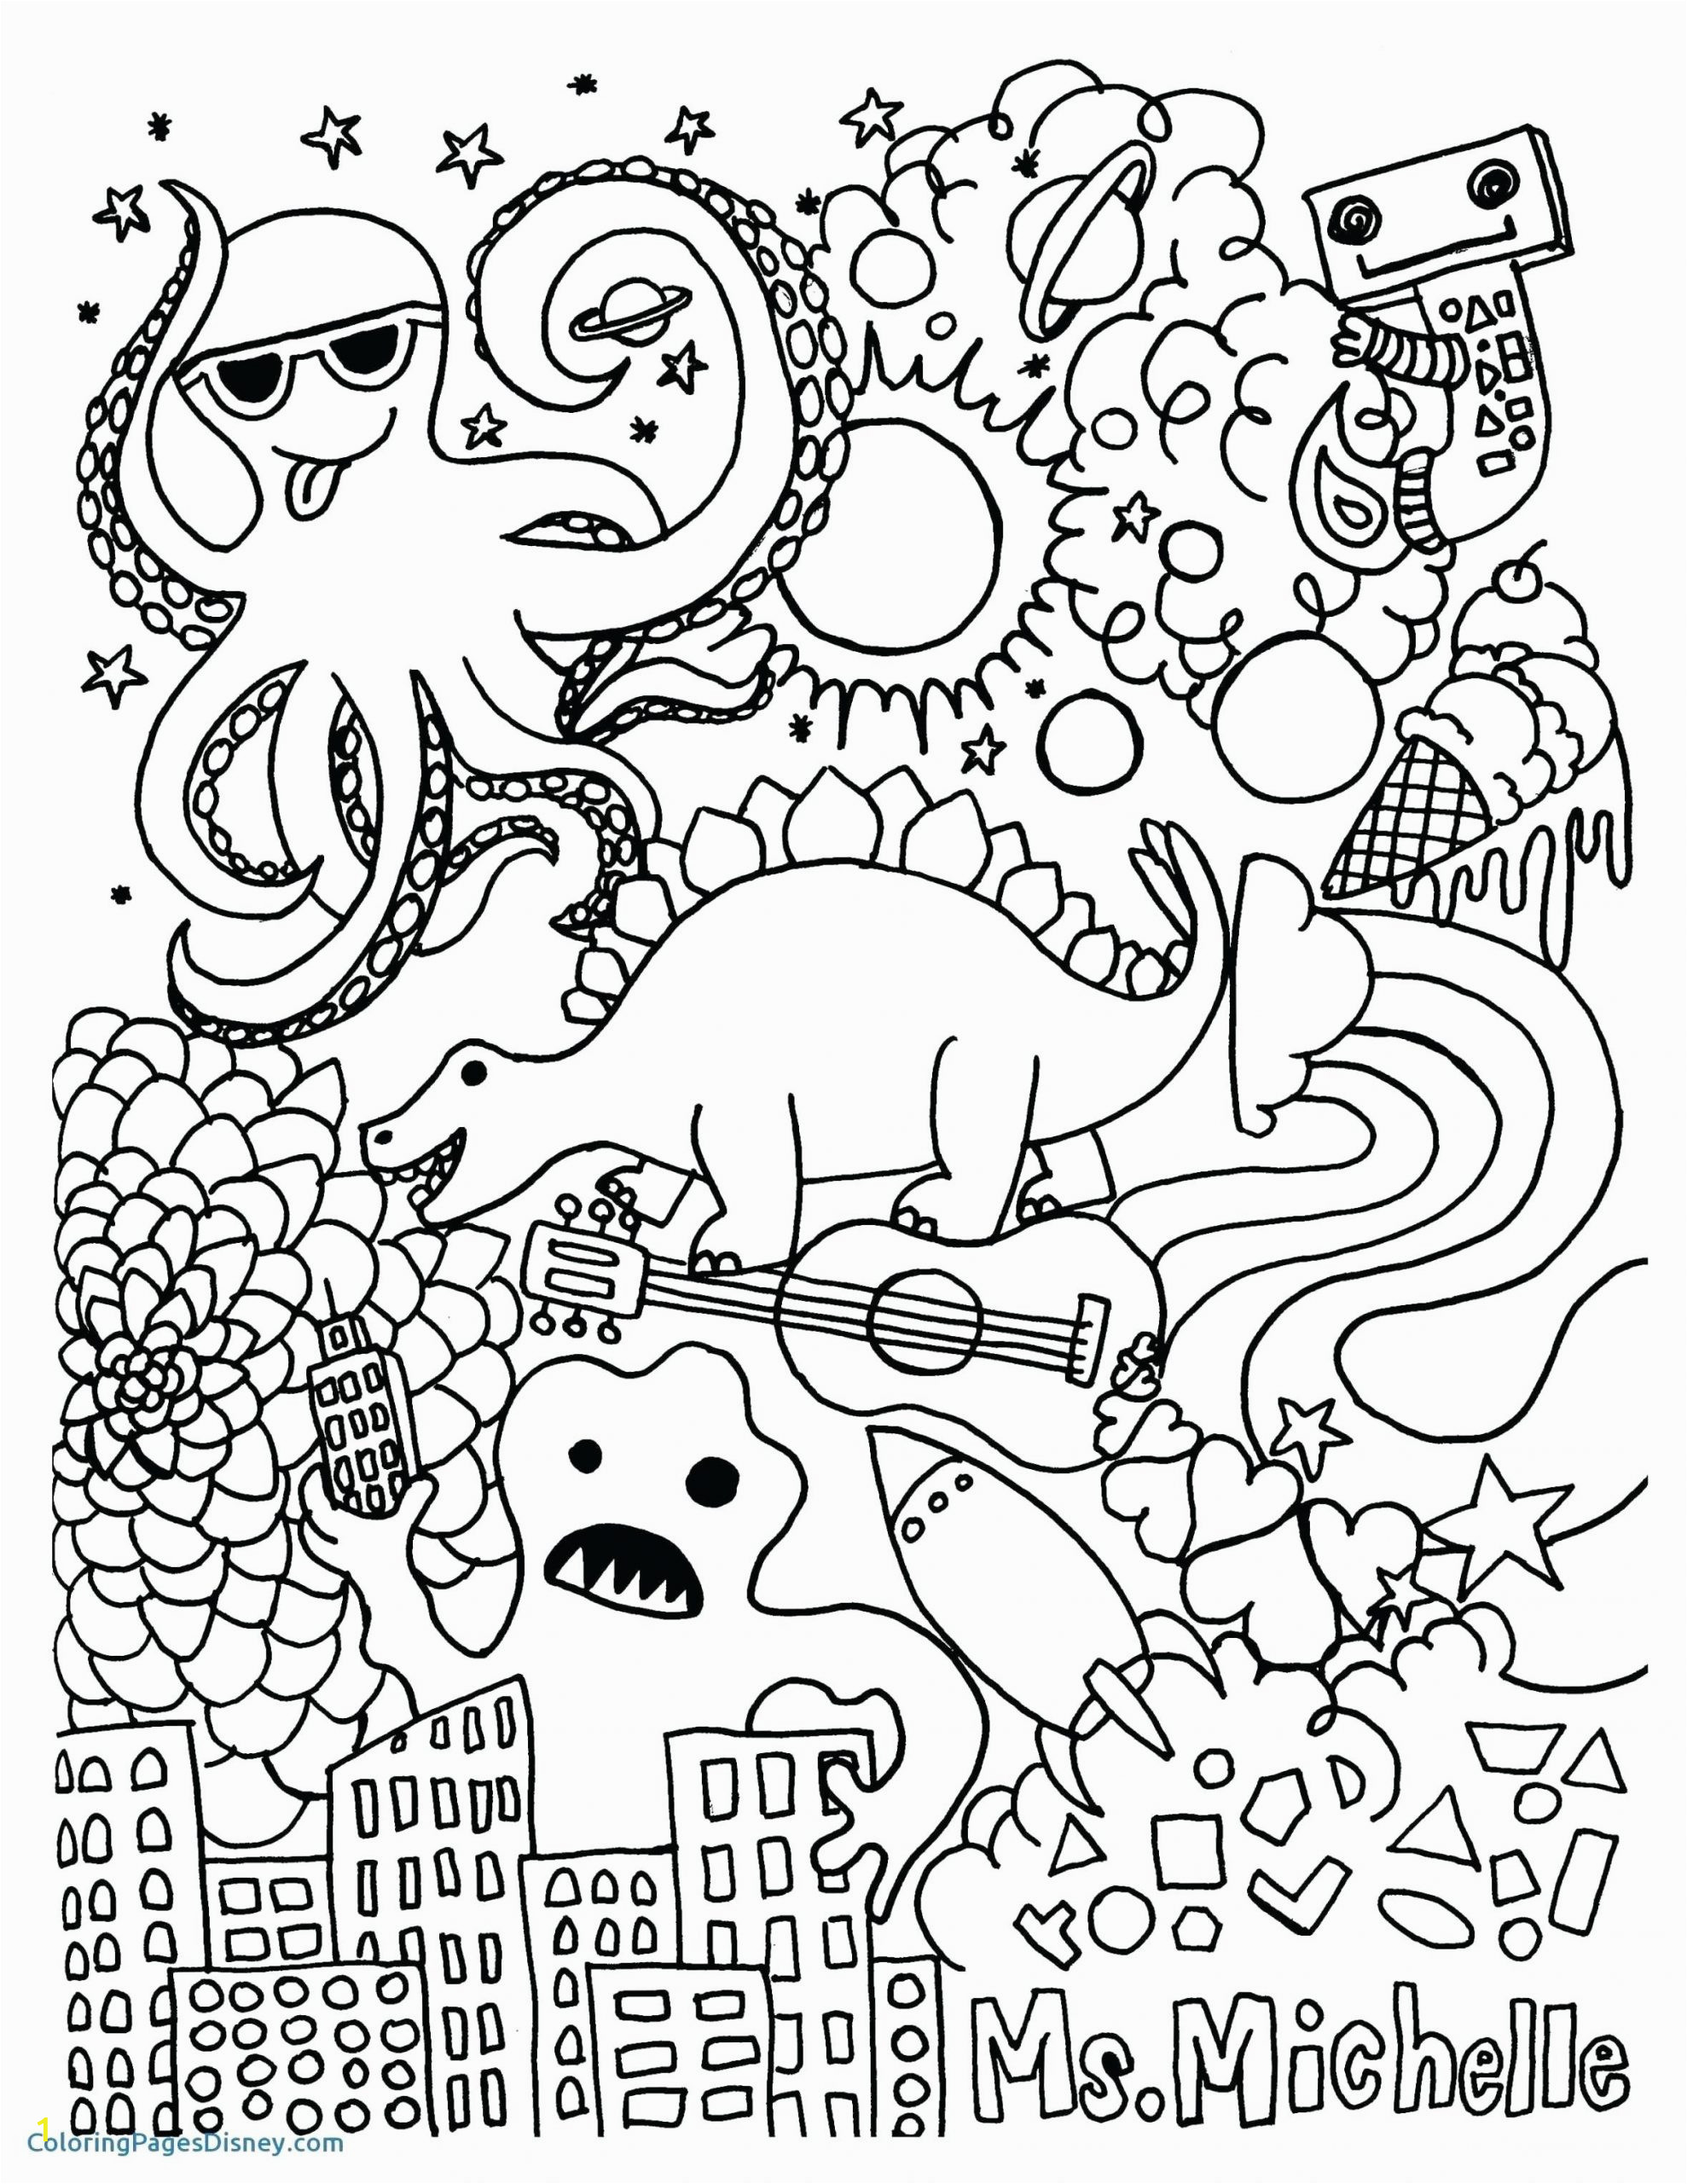 Free Printable Yoga Coloring Pages New Coloring Pages for Kindergarten Kids Beh Coloring